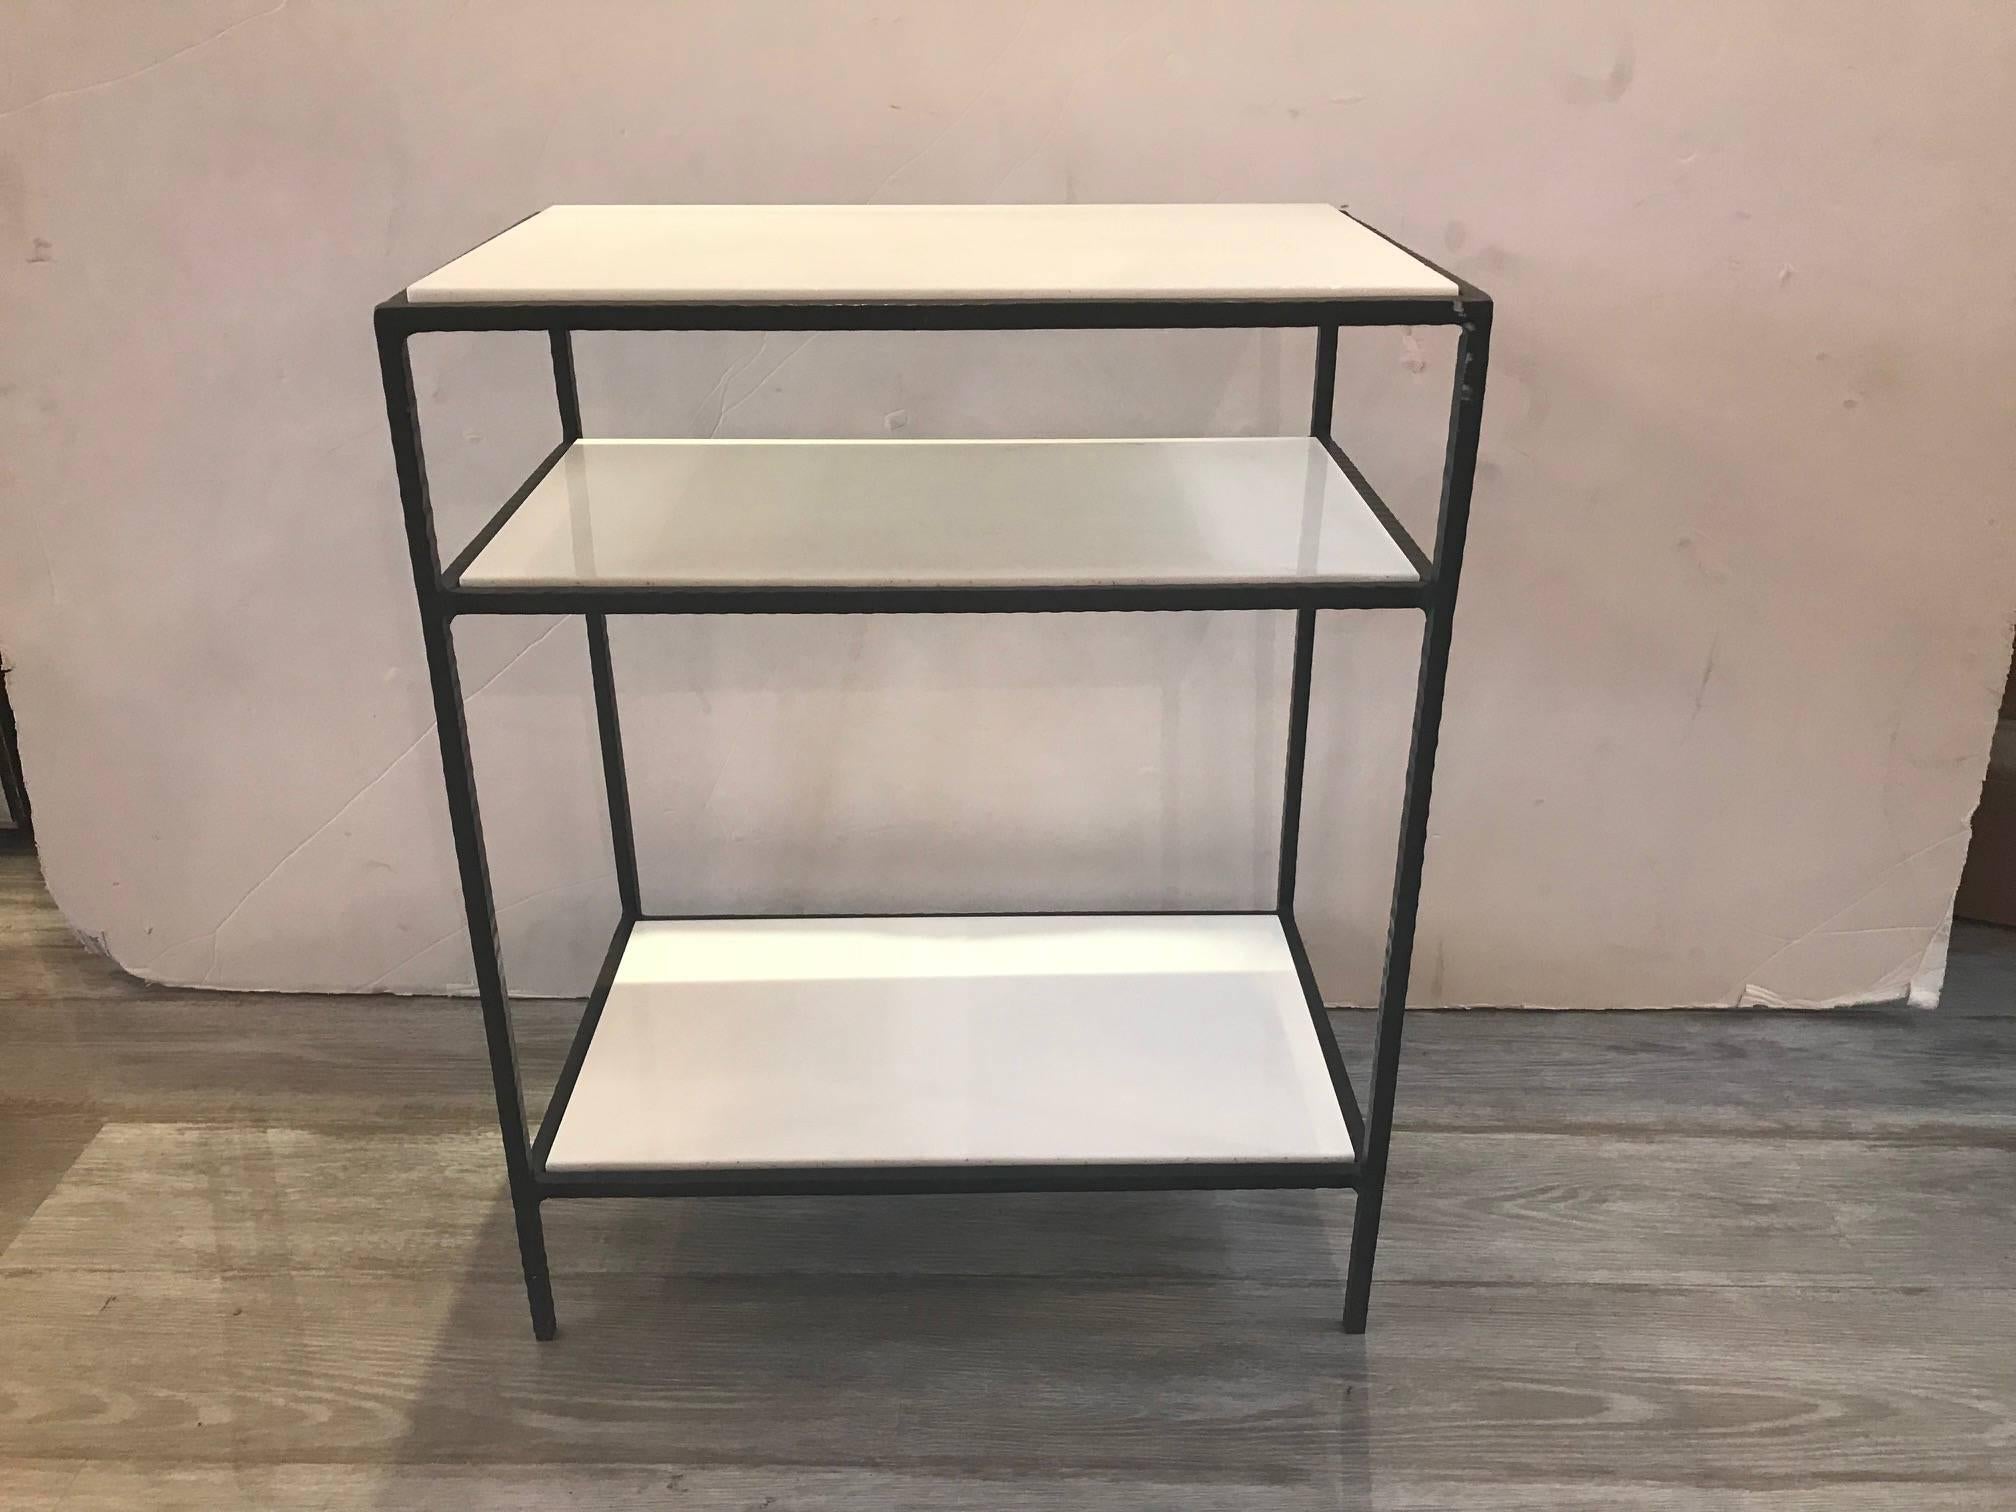 Very chic three-tiered side table with milk glass shelves. The glass is almost the color and consistency of Carrara marble. The hand-forged wrought iron frame is hand textured. Very solid and elegant piece.